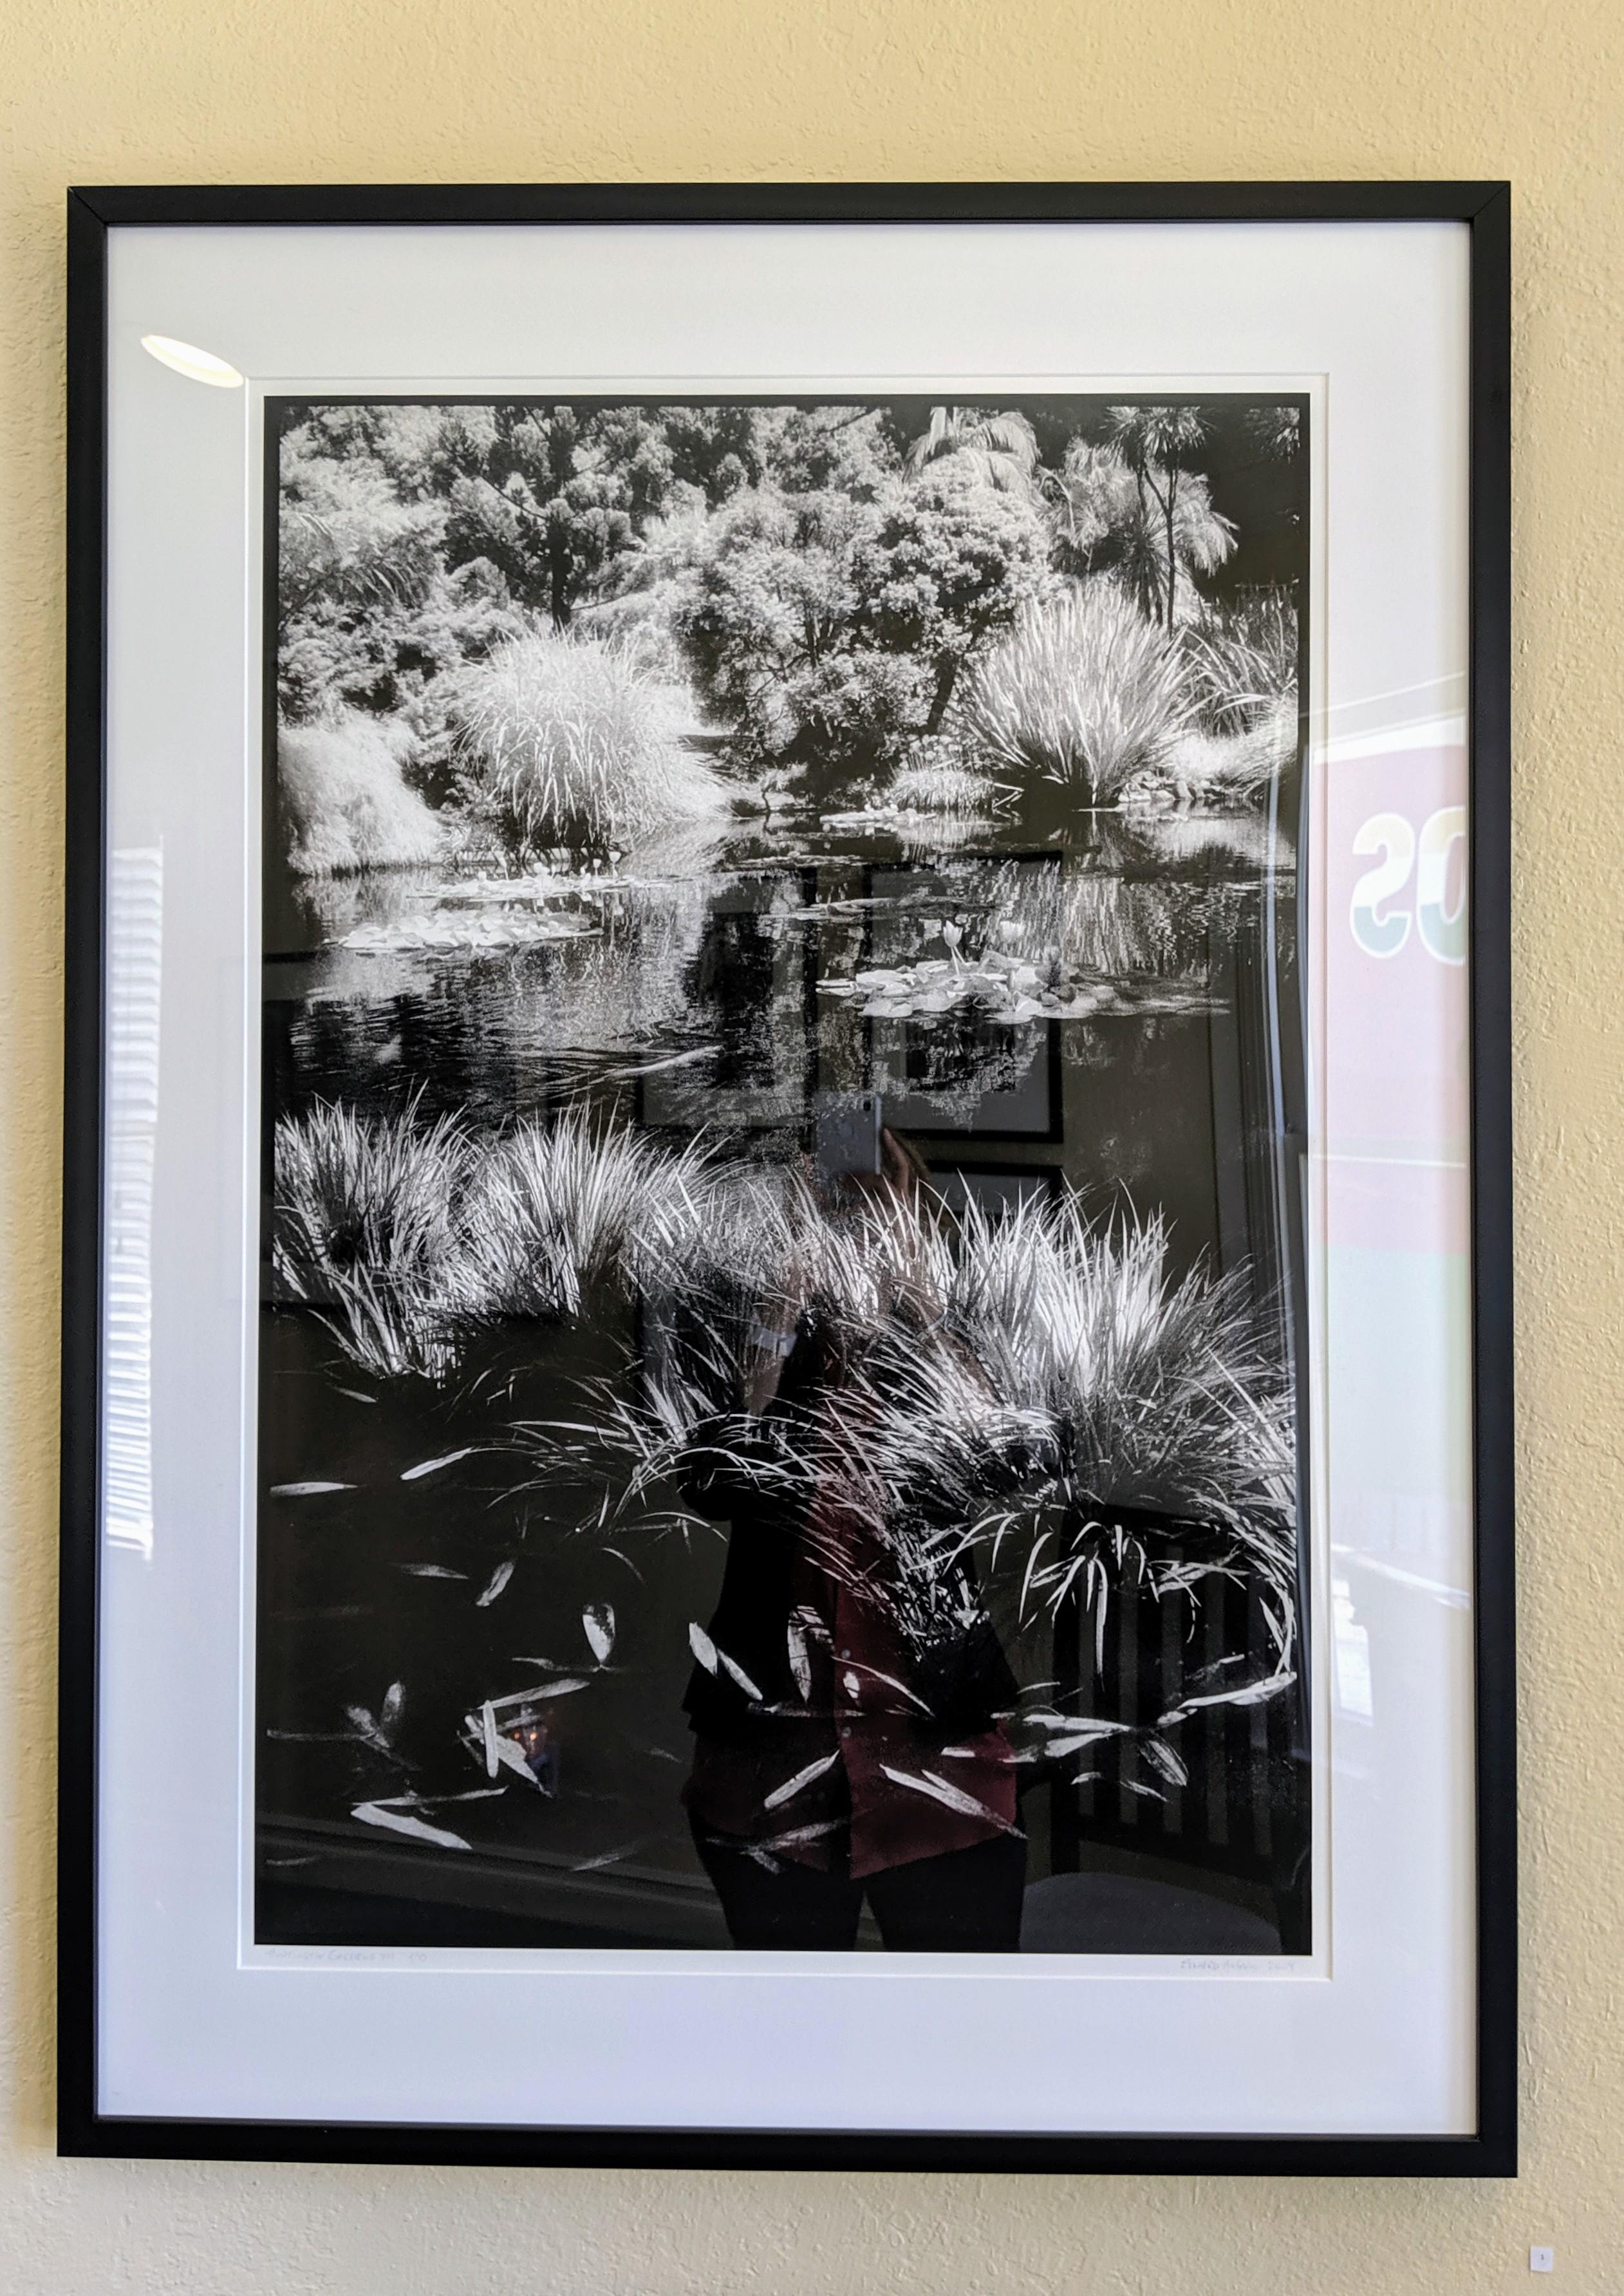 Huntington Gardens XII - Contemporary Landscape Photography of Pond & Plants  - Black Black and White Photograph by Edward Alfano